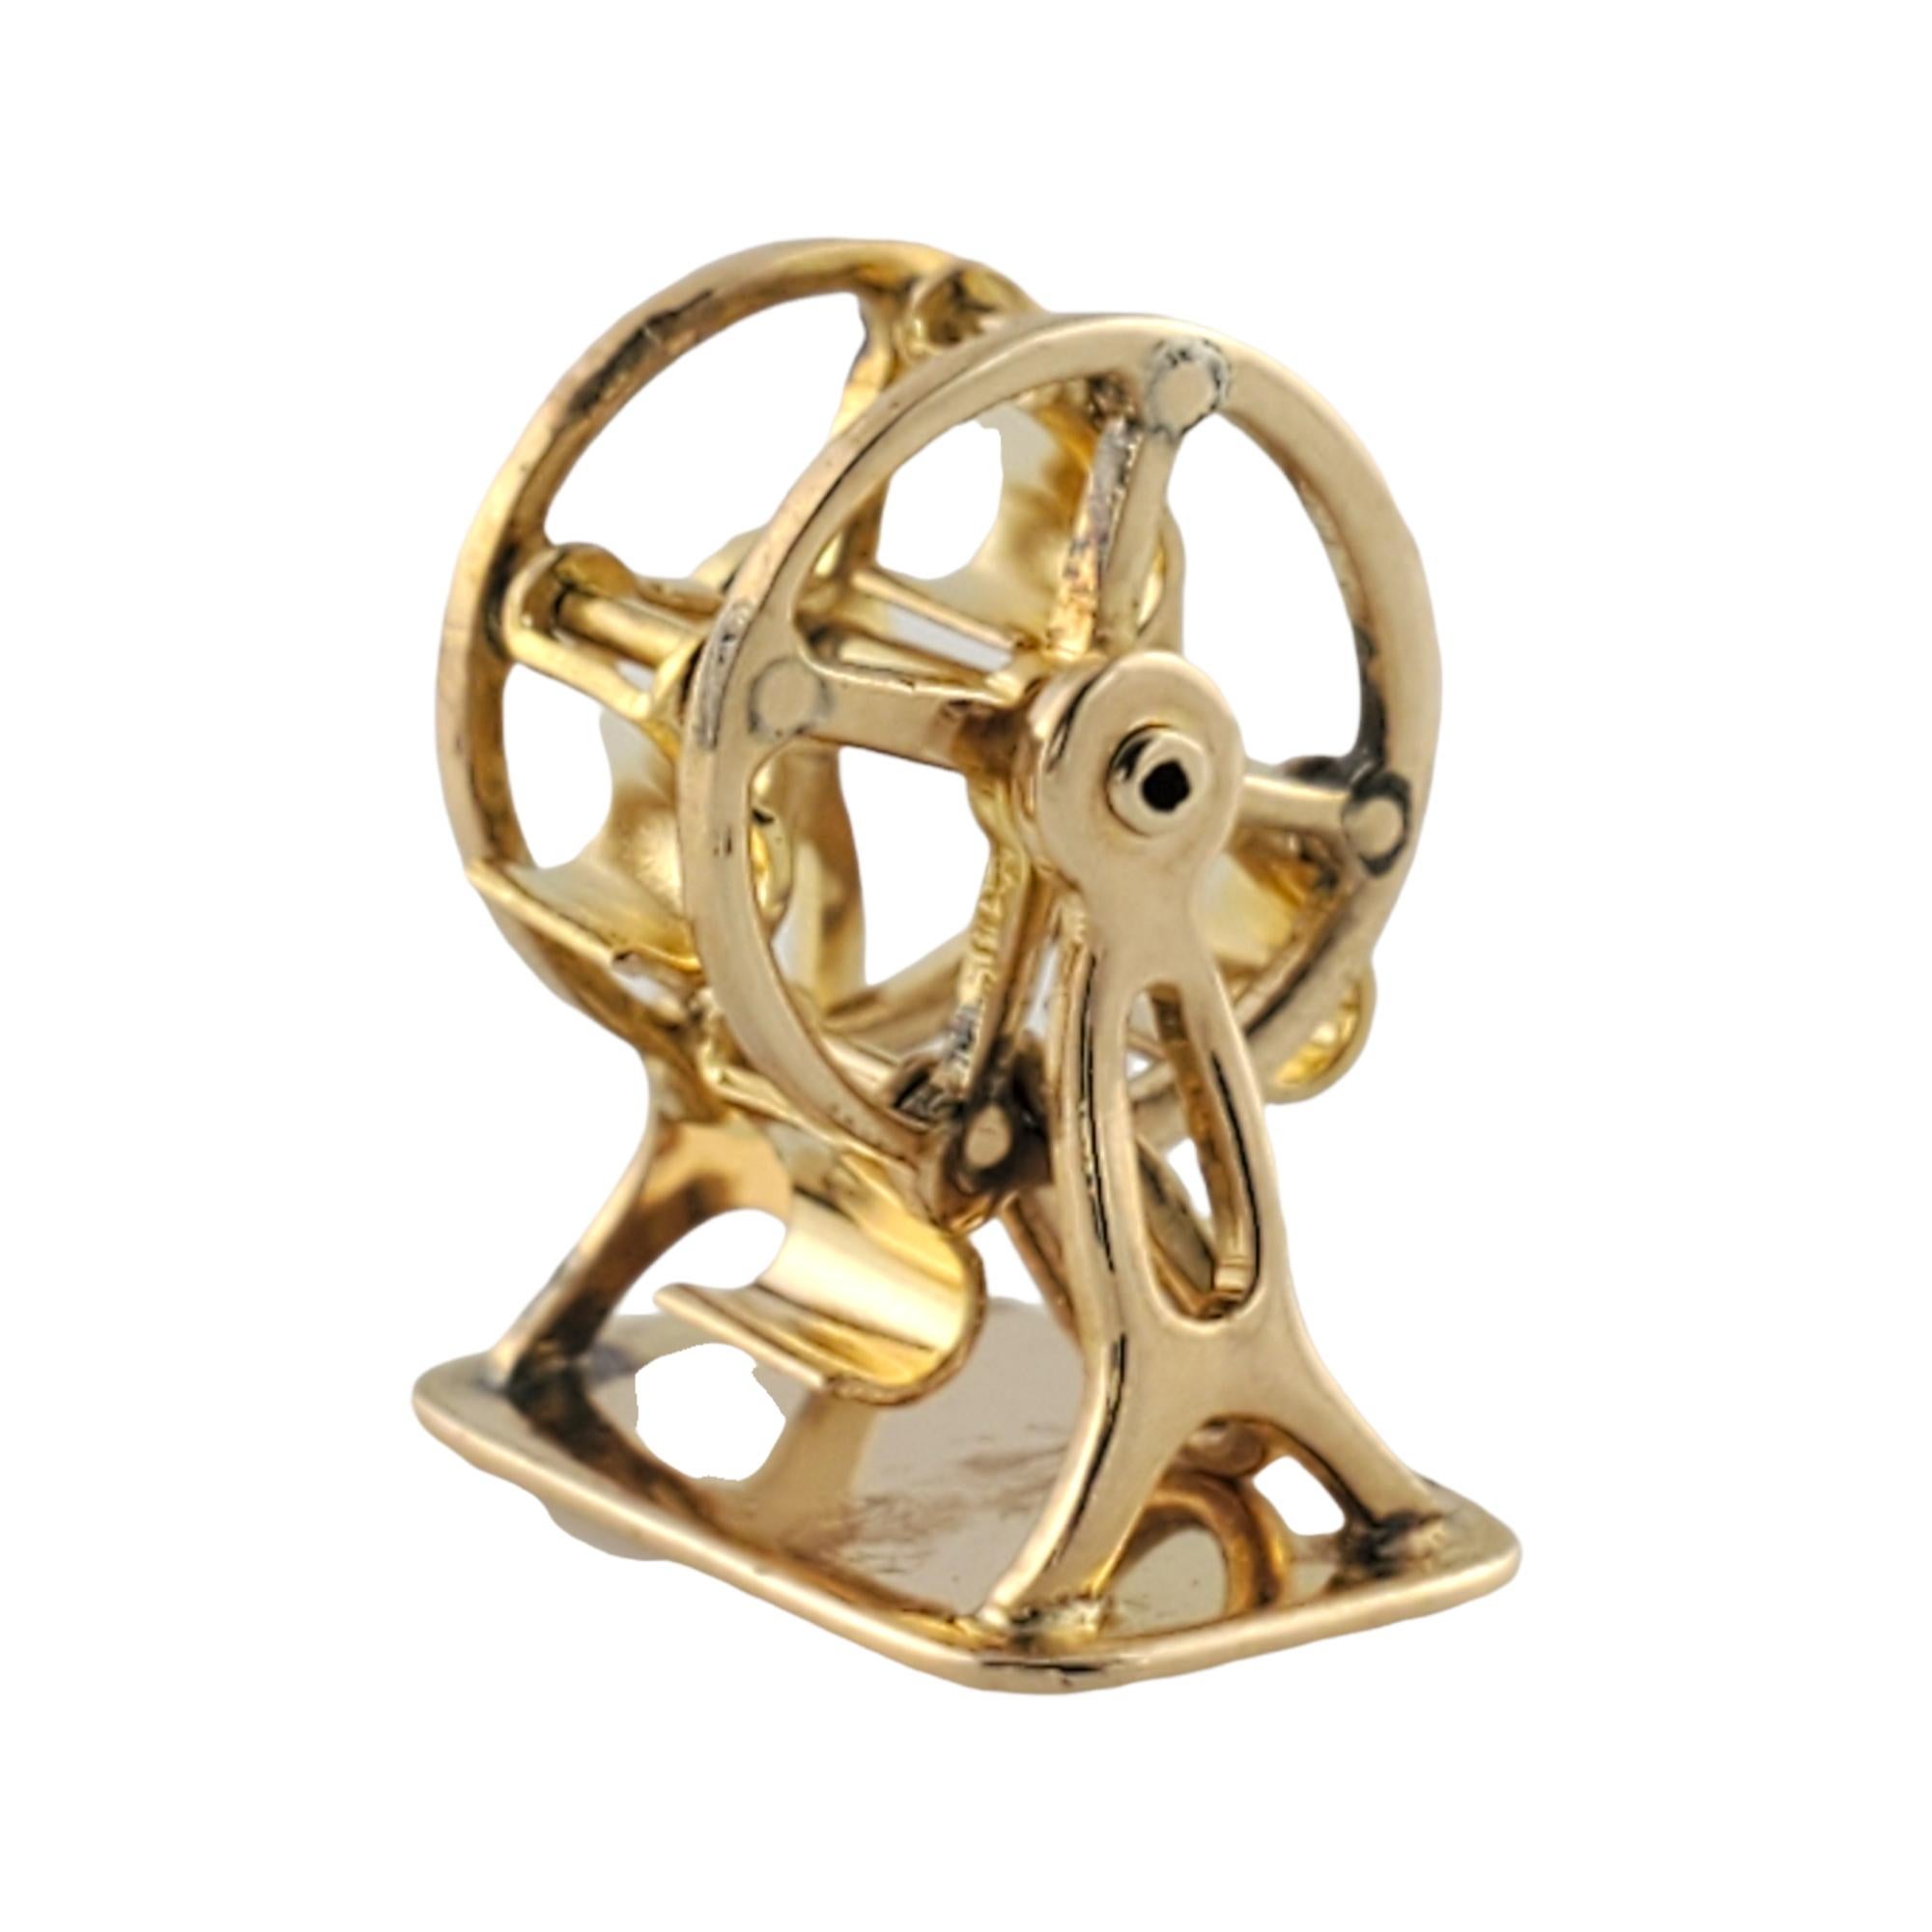 14K Yellow Gold Ferris Wheel Charm

You are sure to love this beautiful 3D Ferris Wheel charm with hanging seats!

Size: 10mm X 11mm

Weight: 1.5g/ 0.9 dwt

Hallmark: 14K

Very good condition, professionally polished.

Will come packaged in a gift